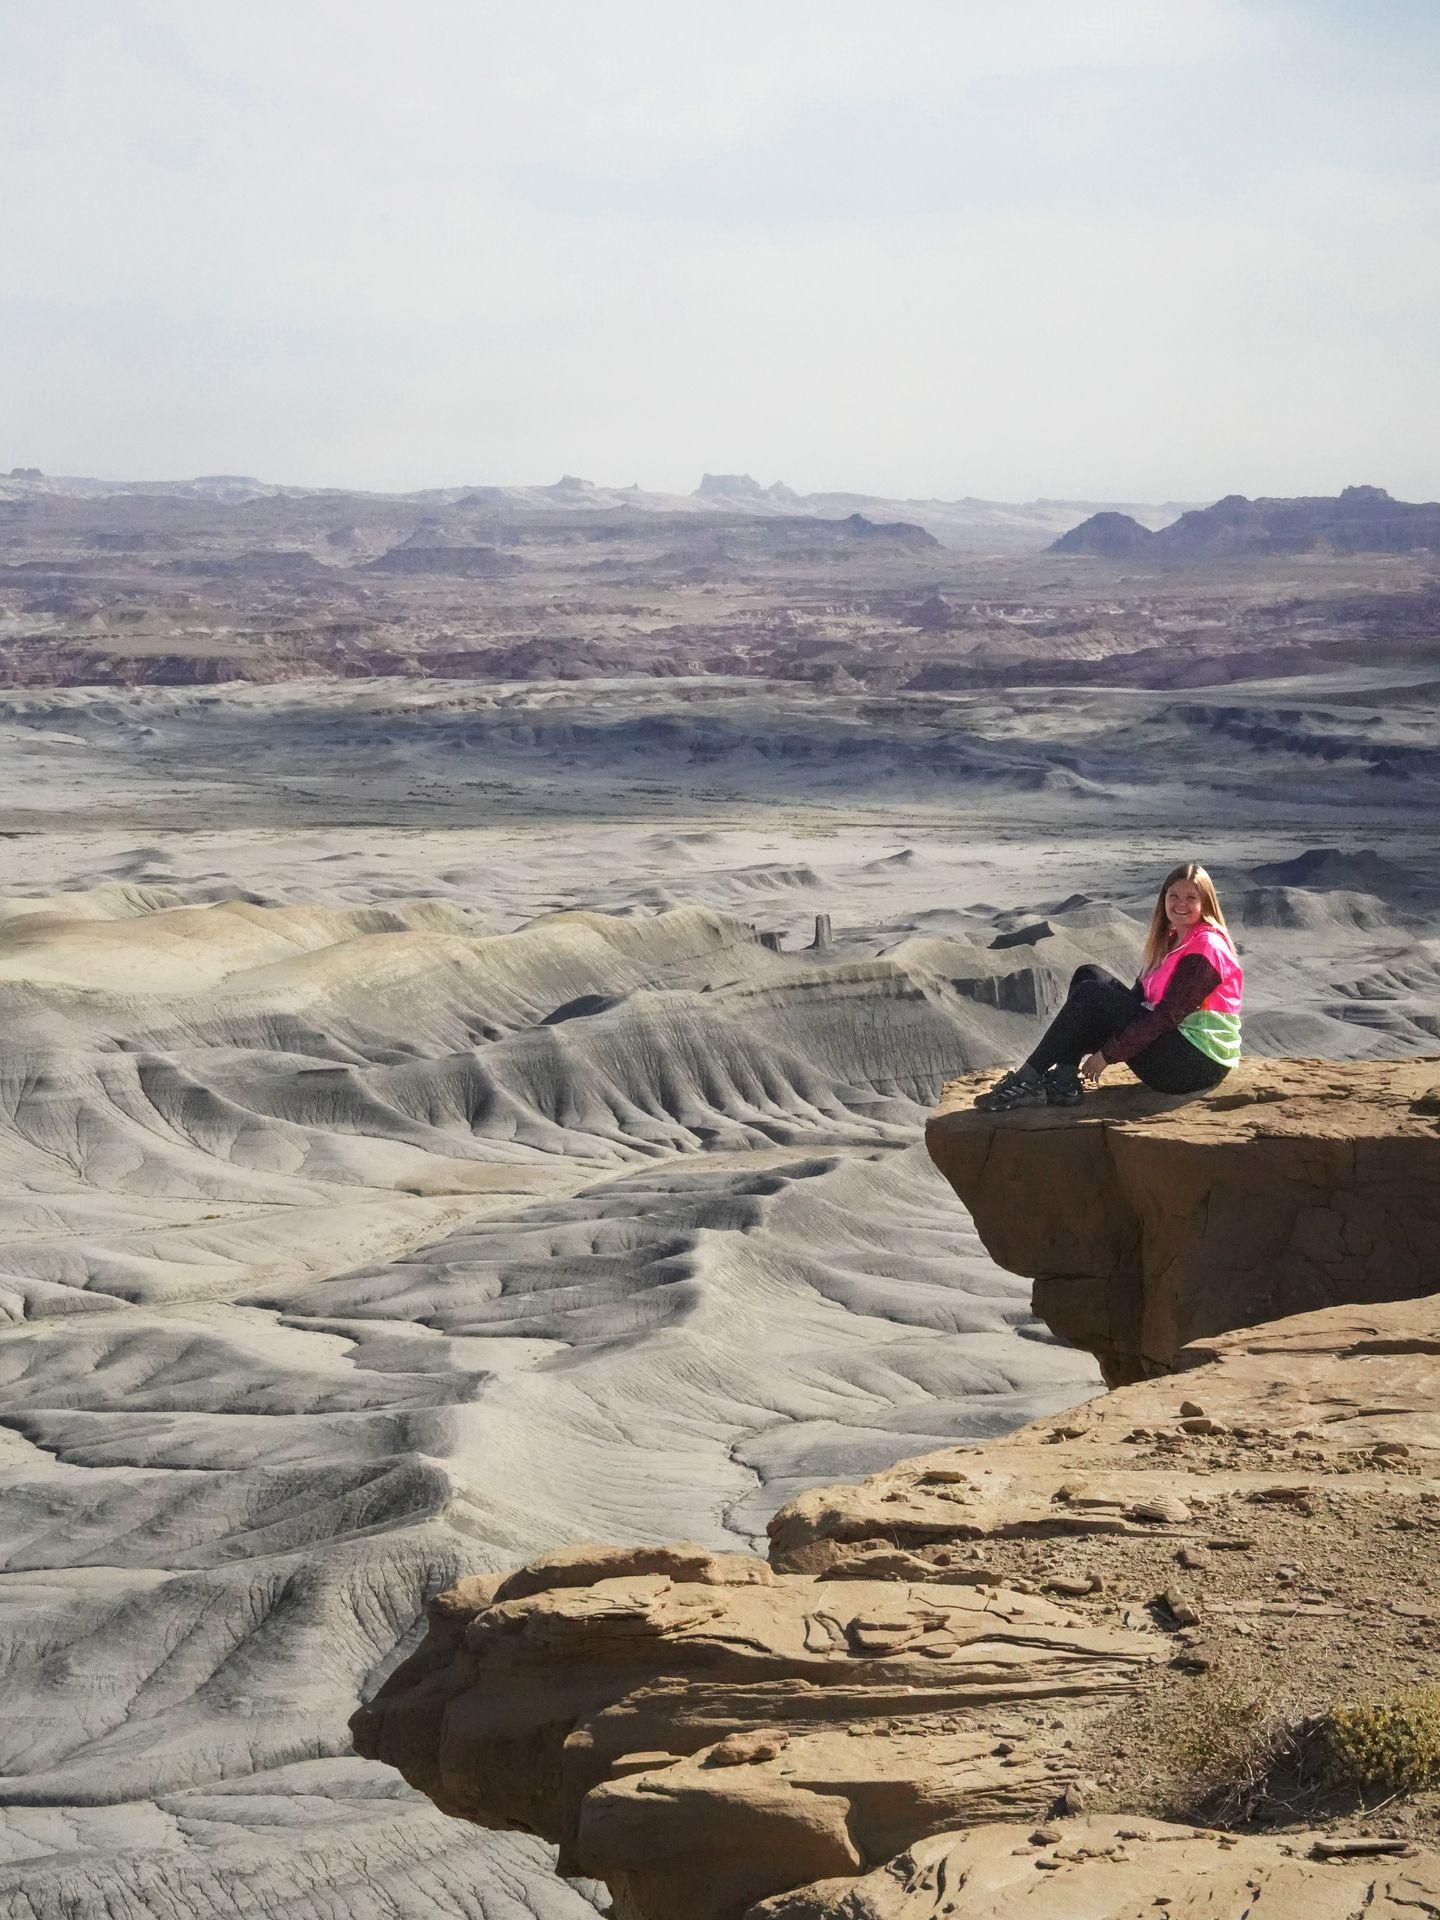 Lydia sitting on the edge of a rock with a view of a gray canyon in the distance at the Moonscape Overlook.